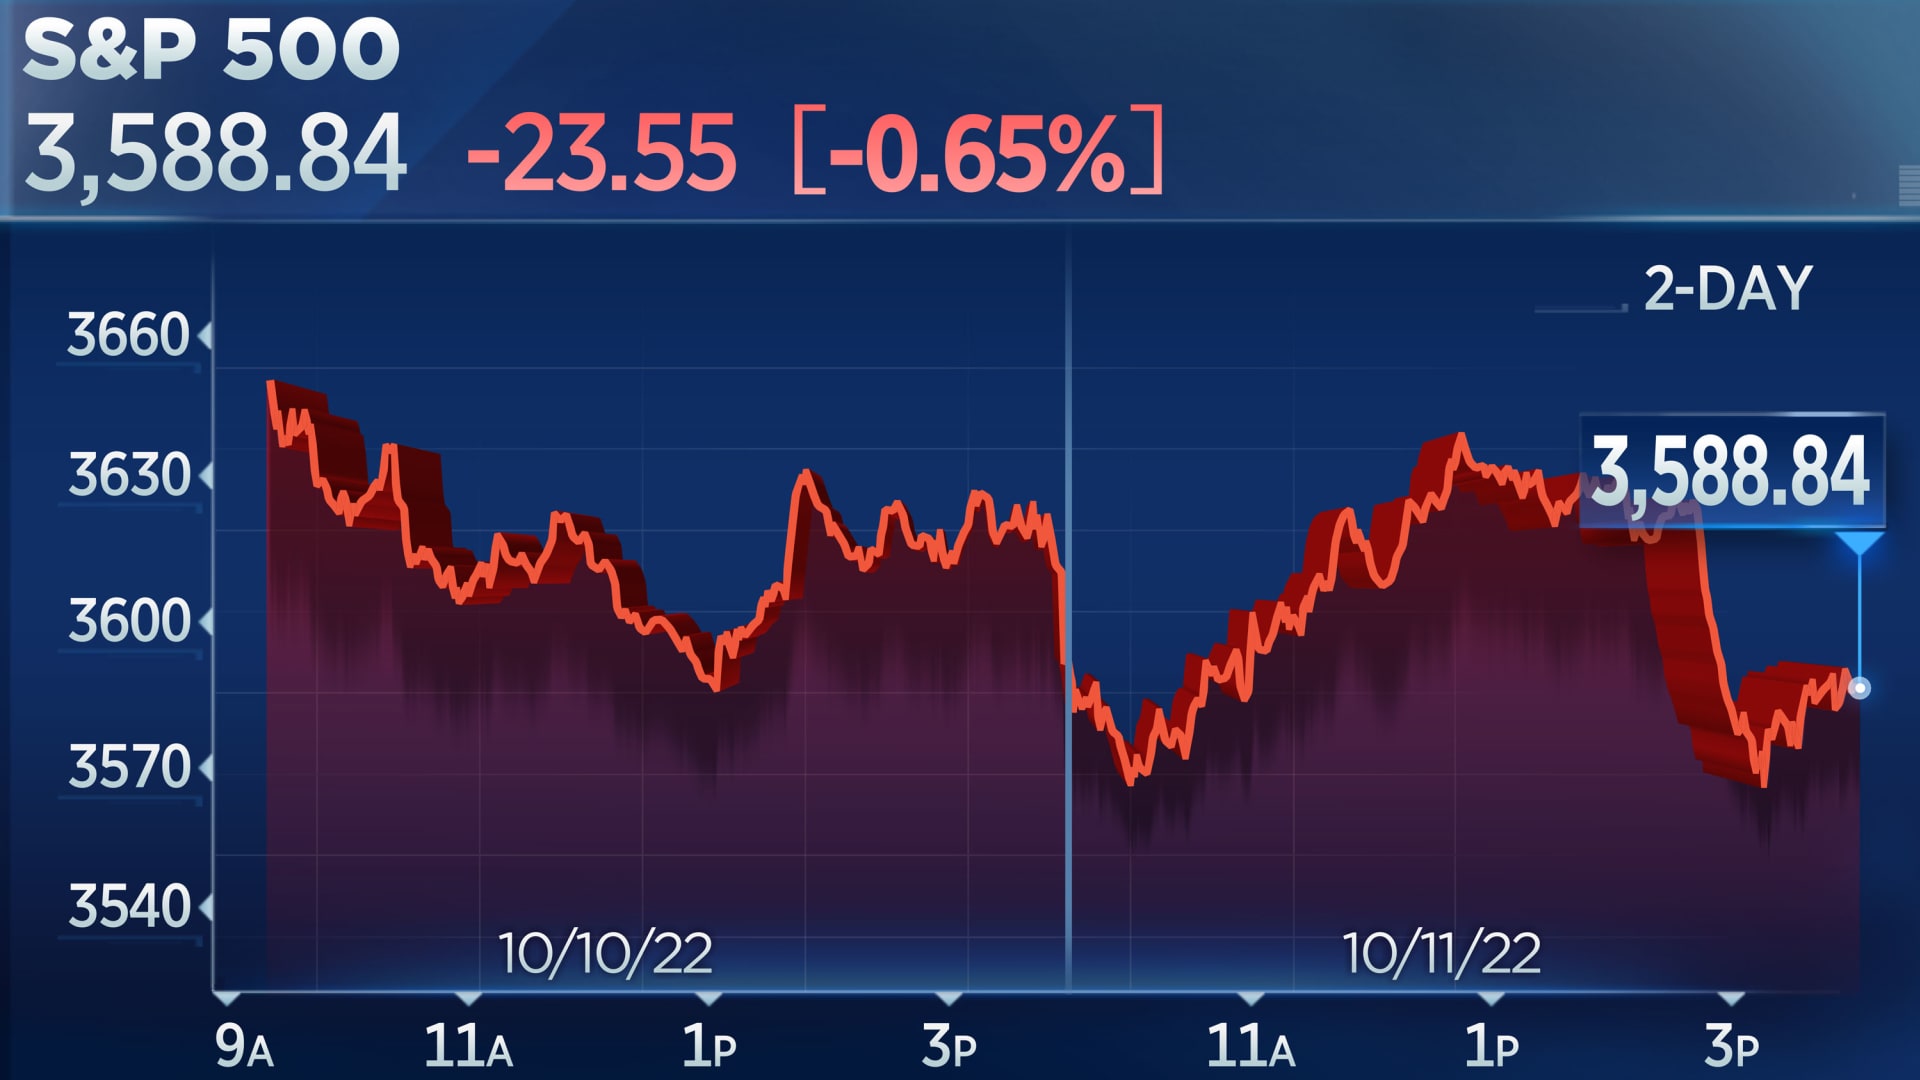 S&P 500 closes lower, notches 5-day losing streak ahead of key inflation report